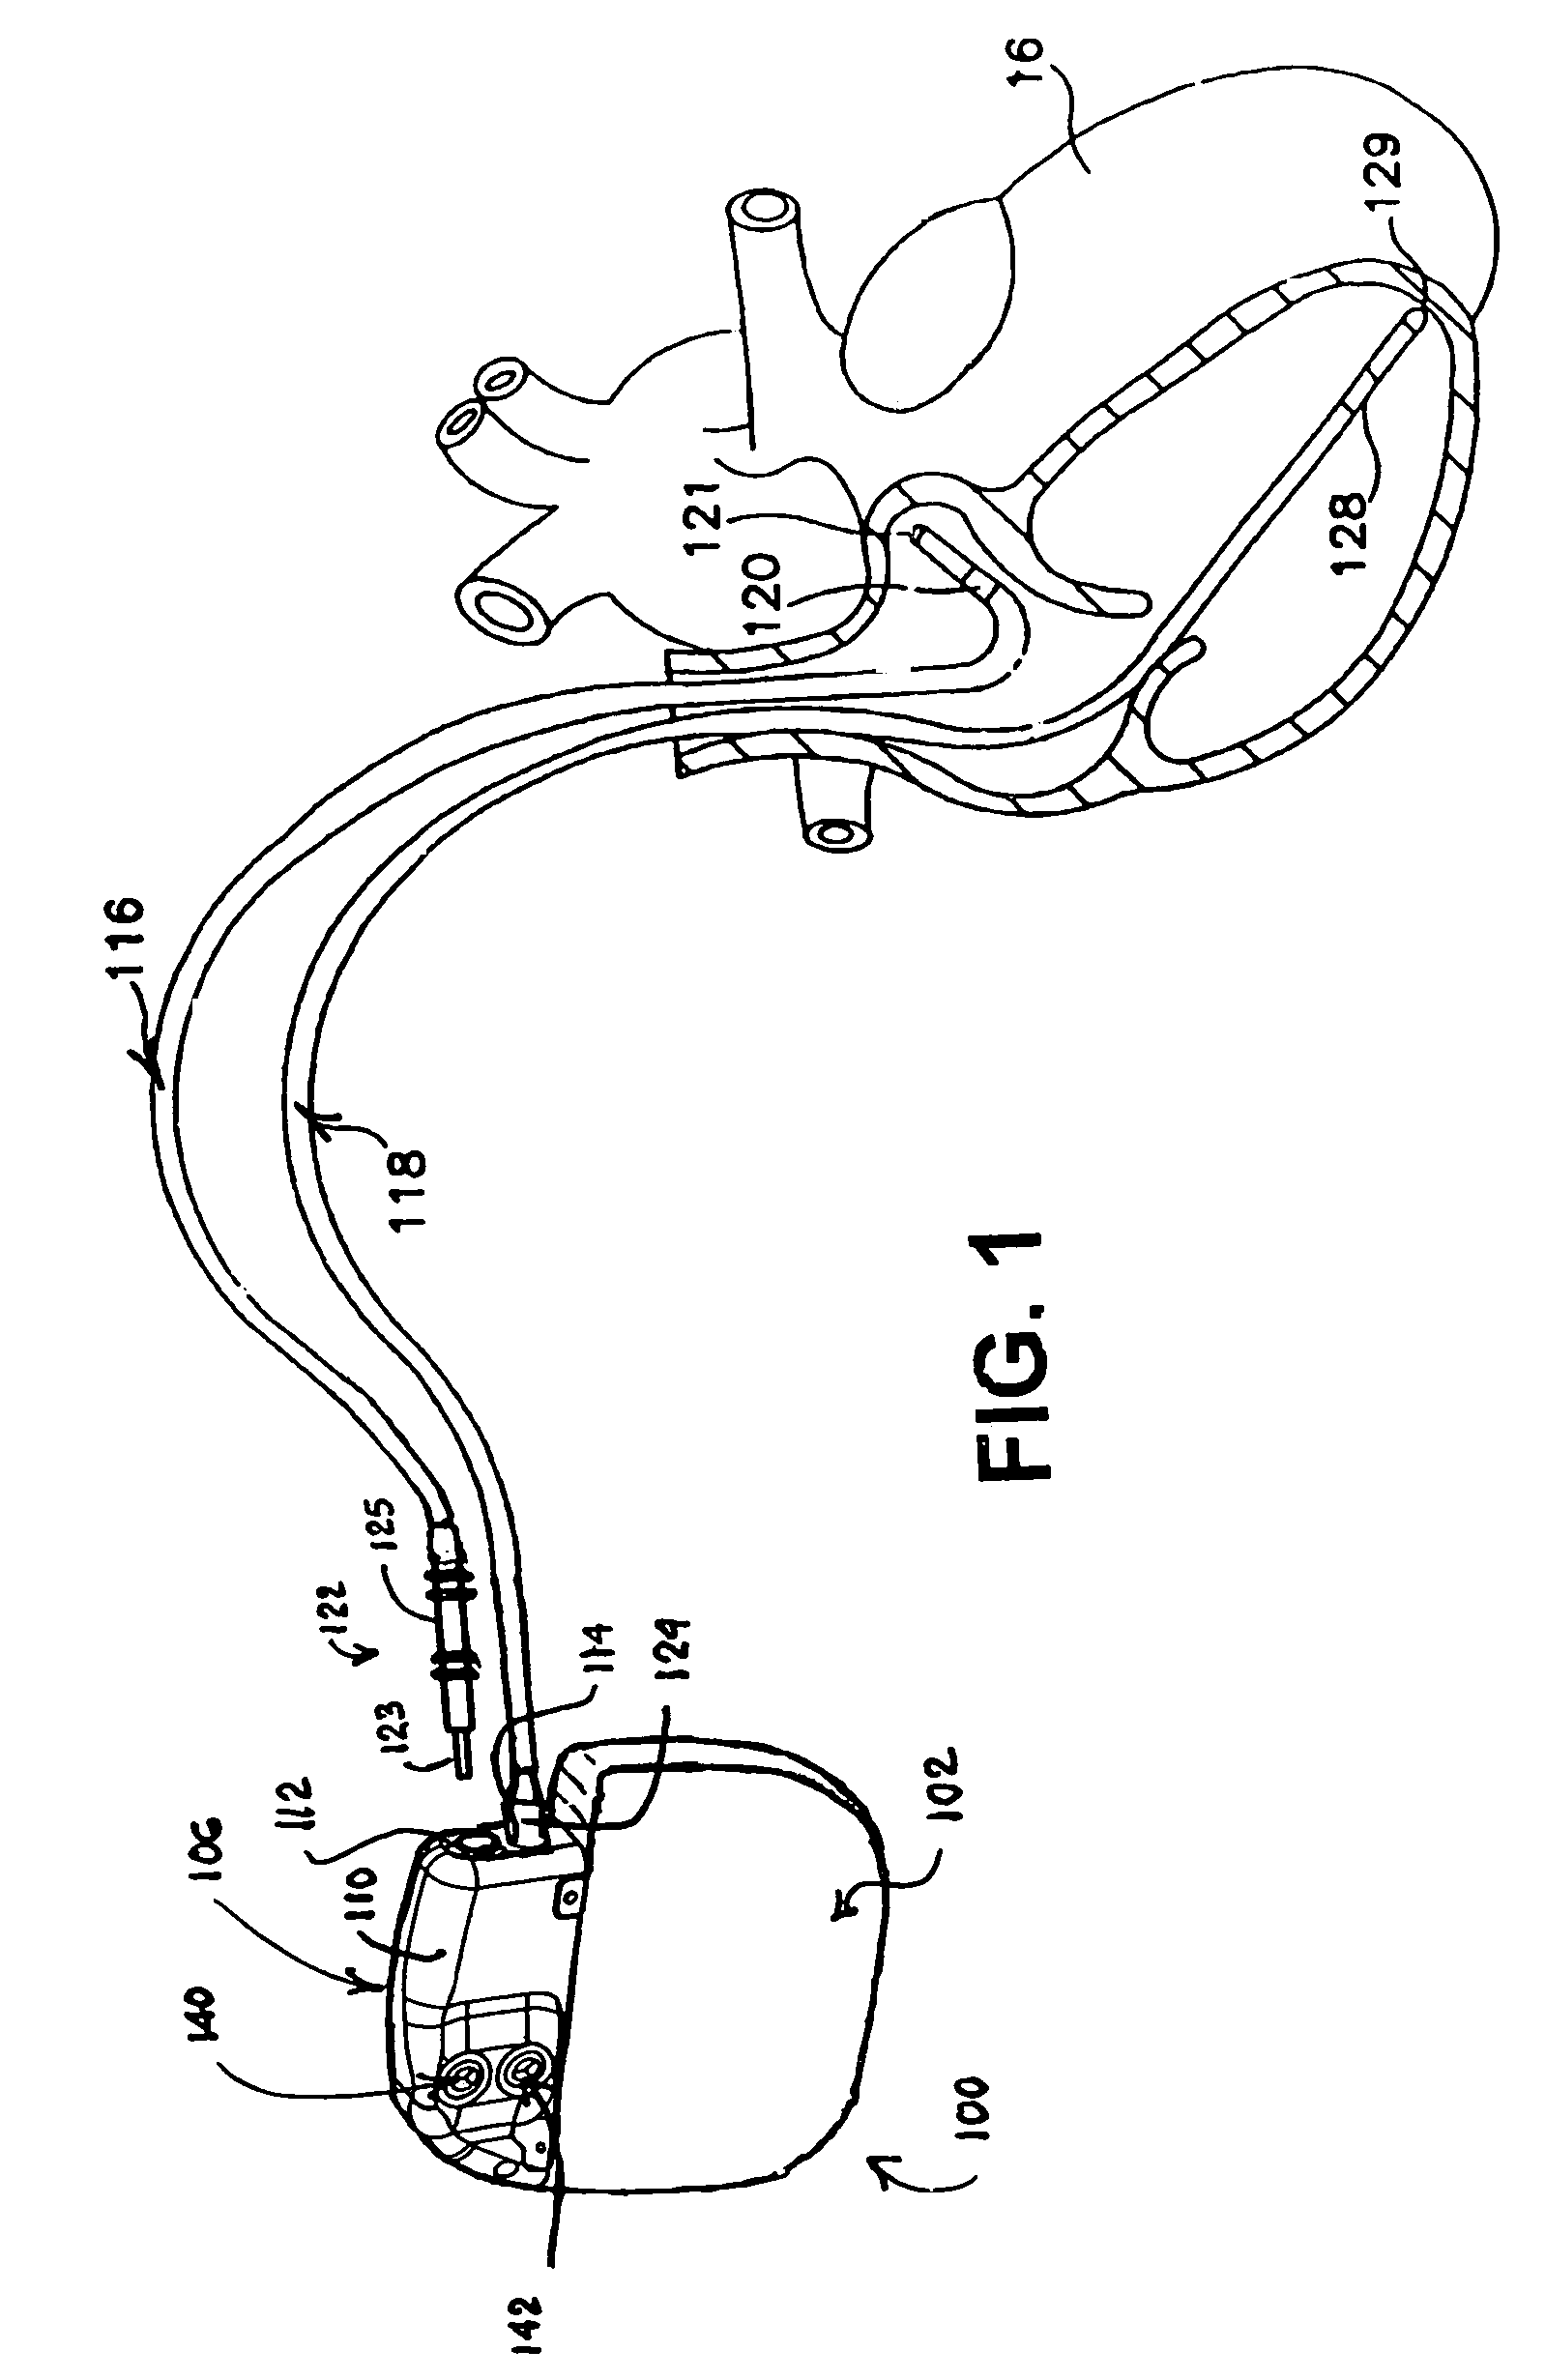 Connector header grommet for an implantable medical device